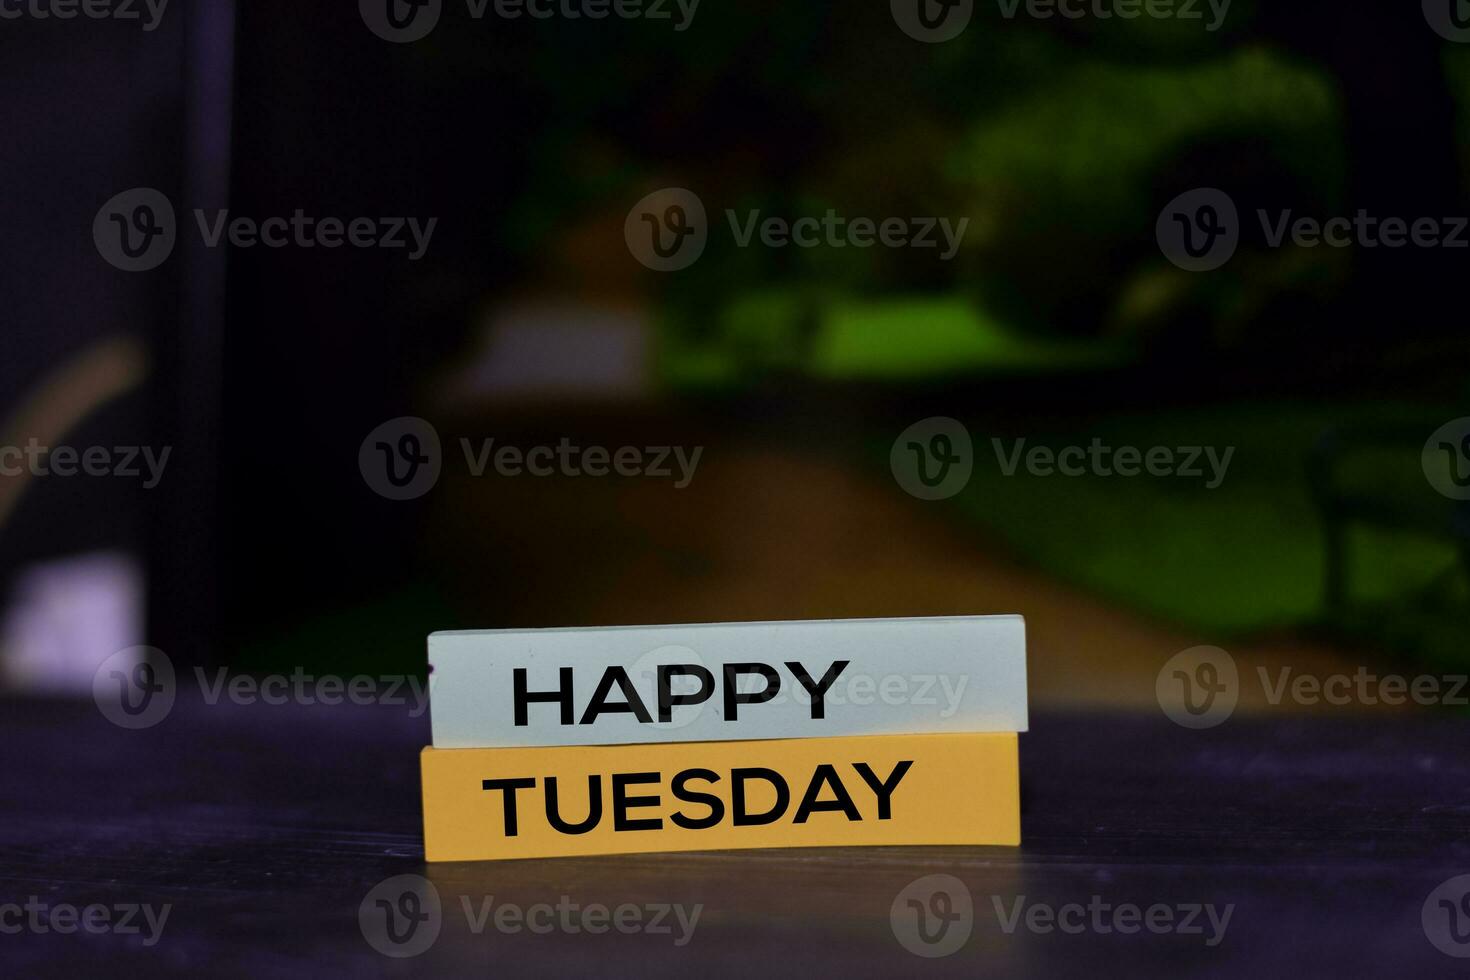 Happy Tuesday on the sticky notes with bokeh background photo